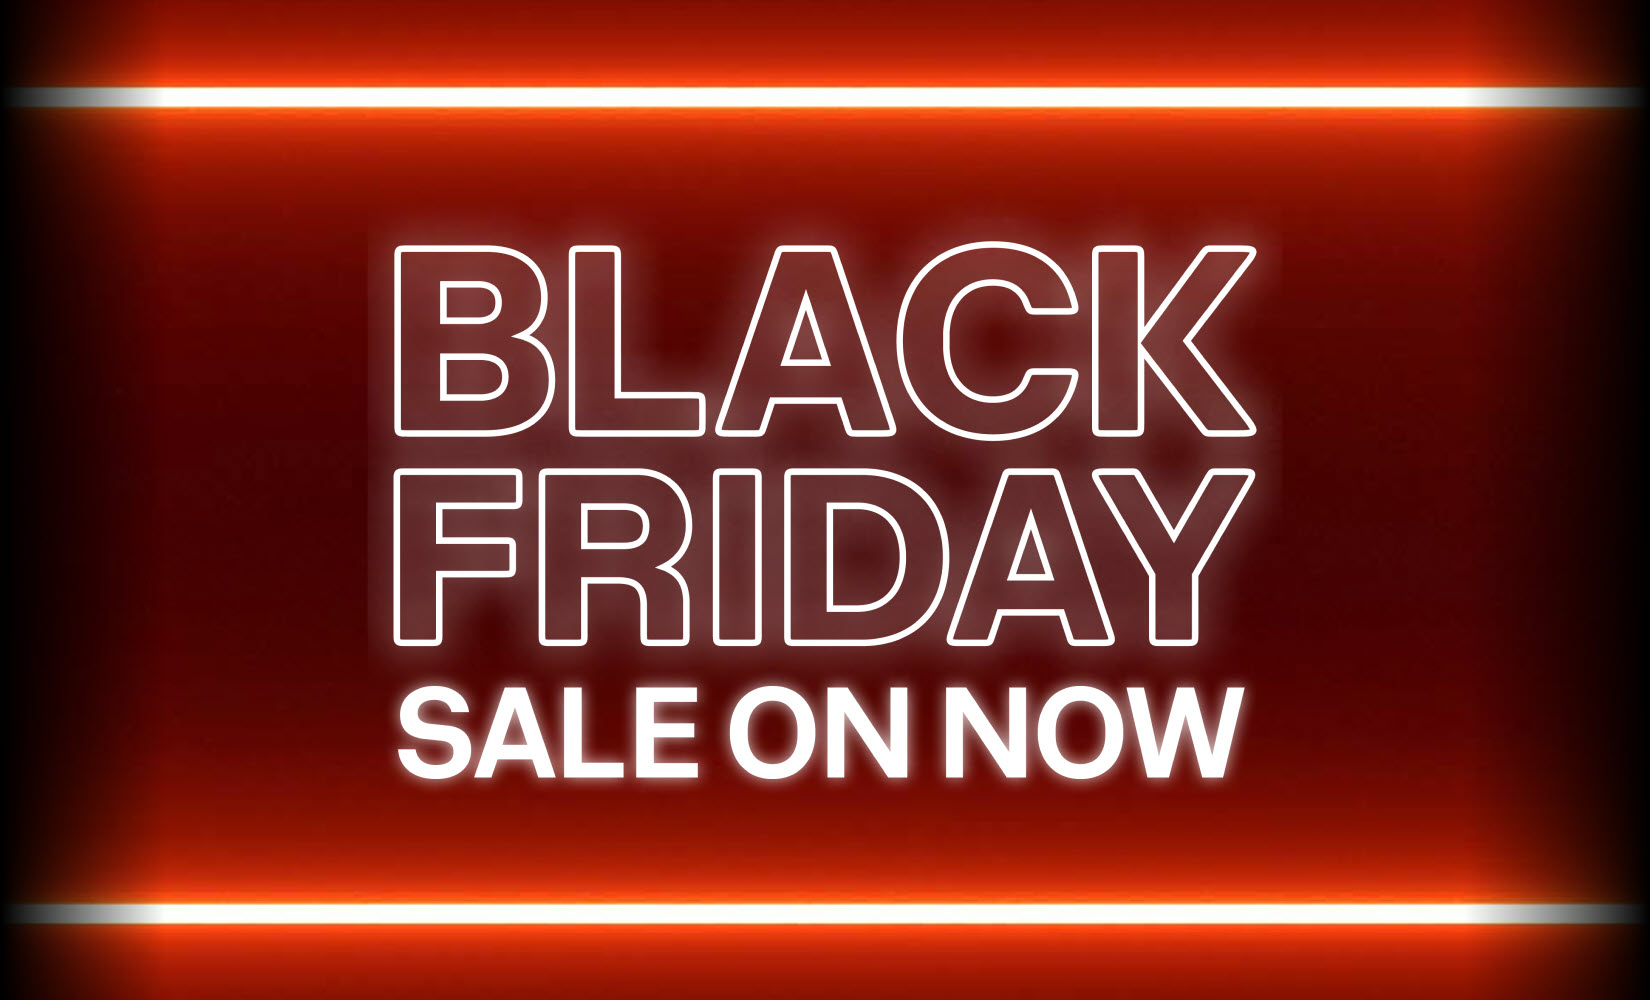 Black Friday sale on now